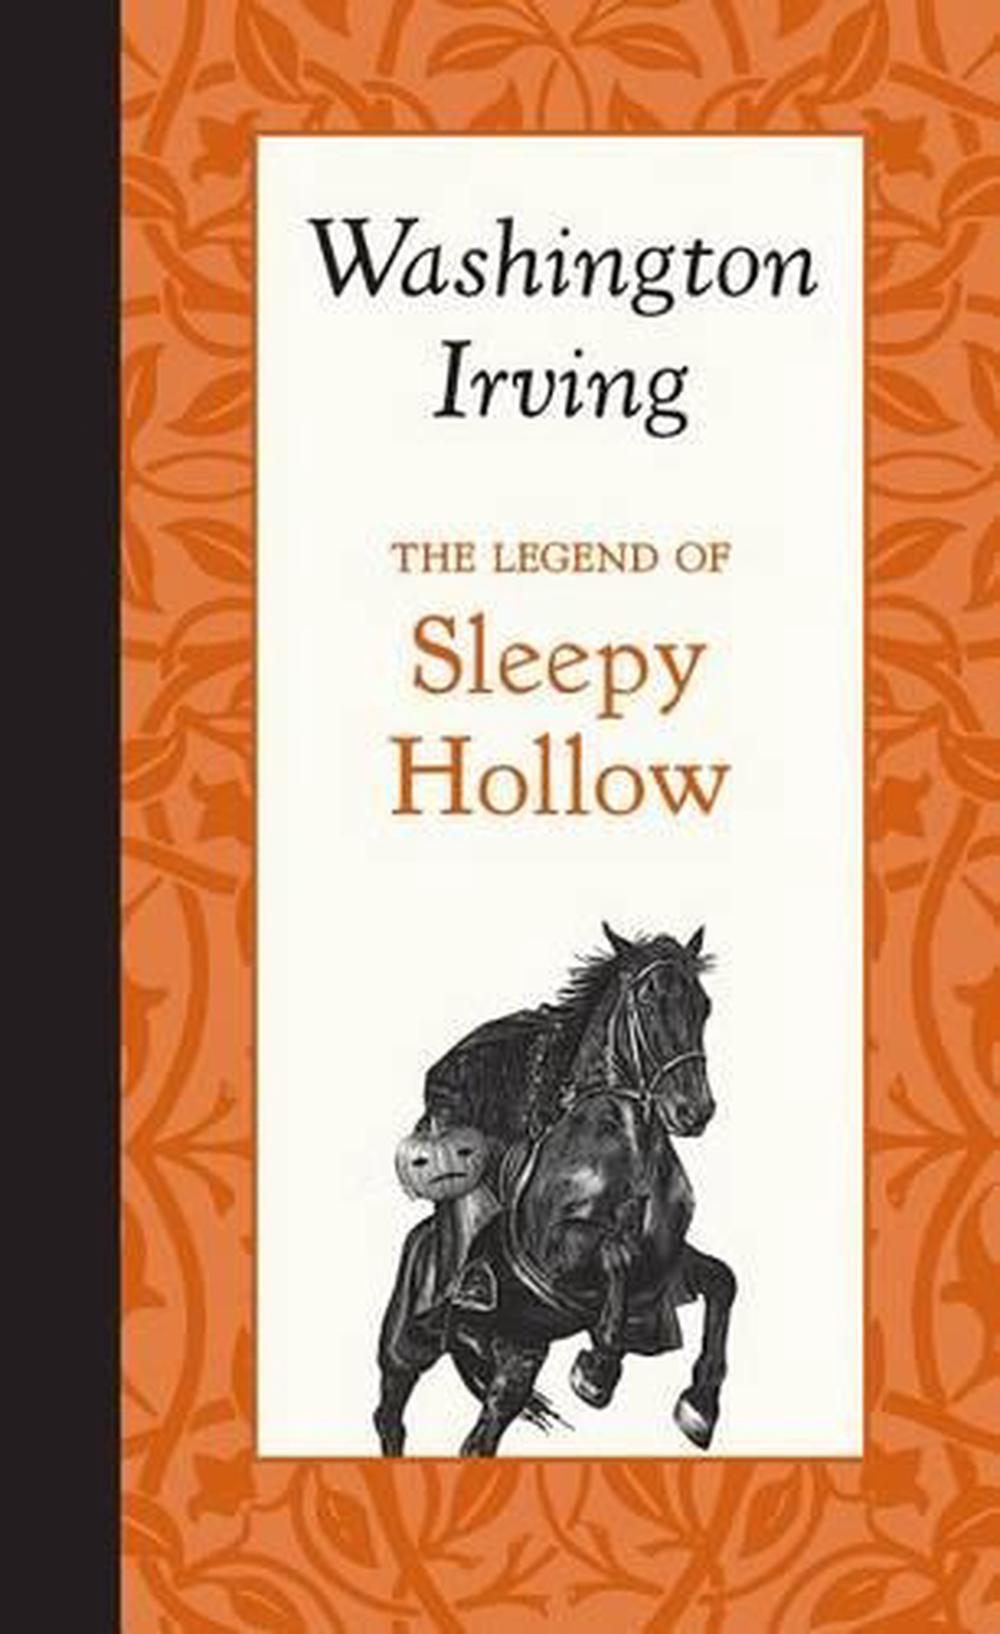 the legend of sleepy hollow by washington irving